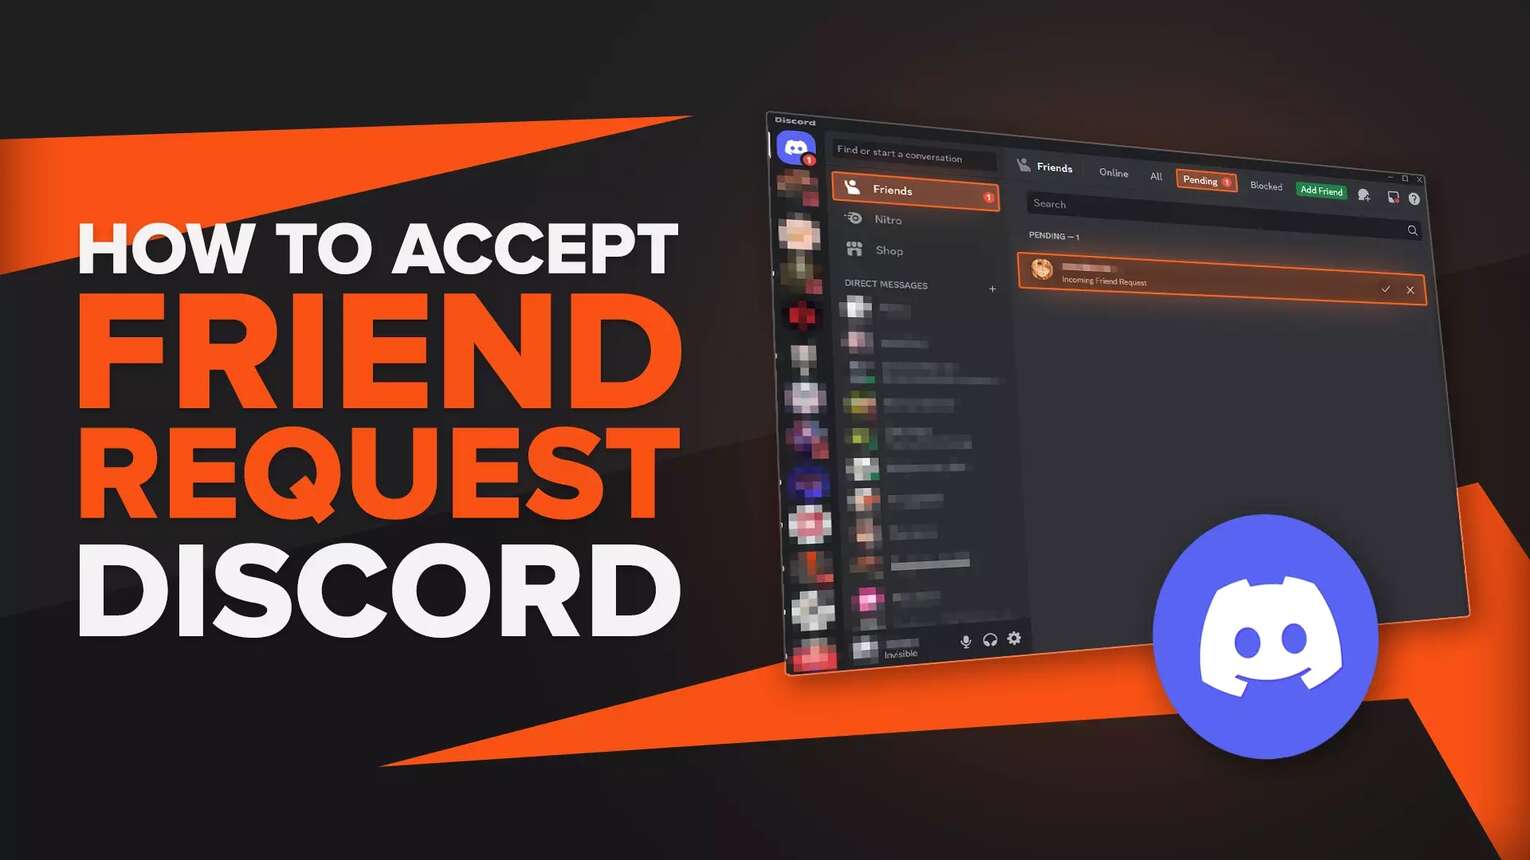 How To Accept A Friend Request On Discord [Explained]